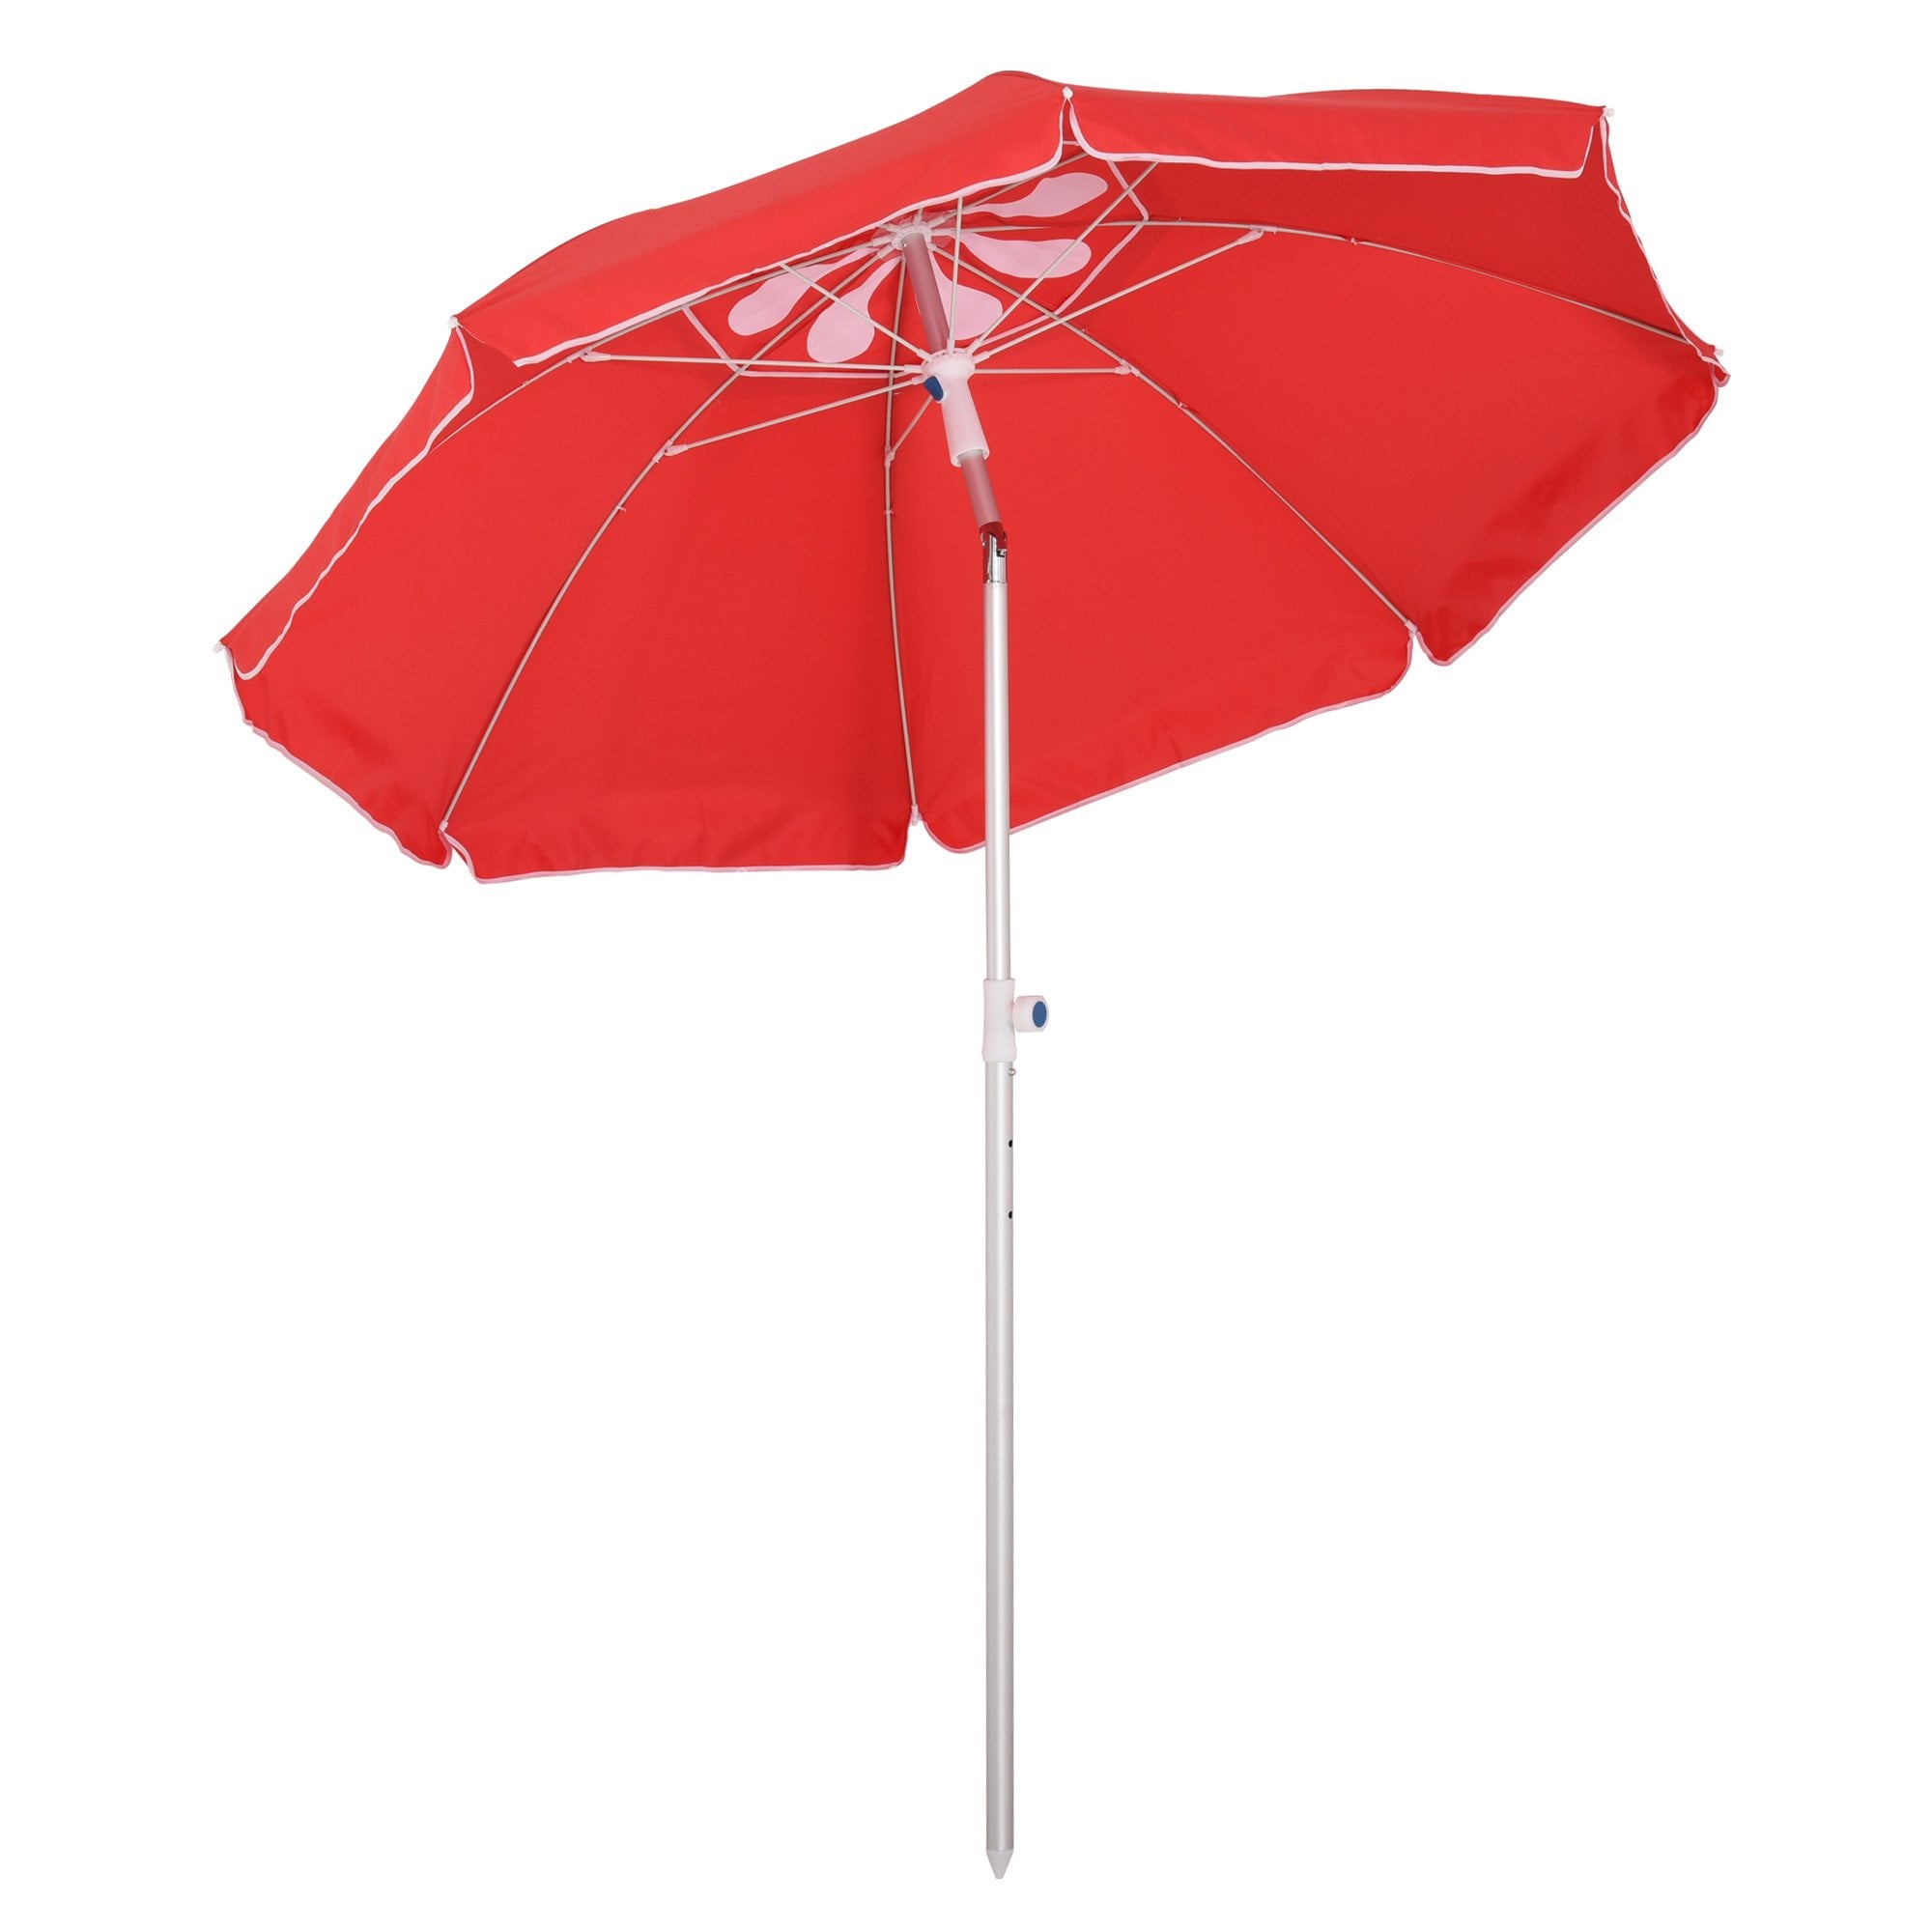 Oasis 1.9 m Beach Umbrella Parasol with Ajustable Angle and Carry Bag - Red - Oasis Outdoor  | TJ Hughes